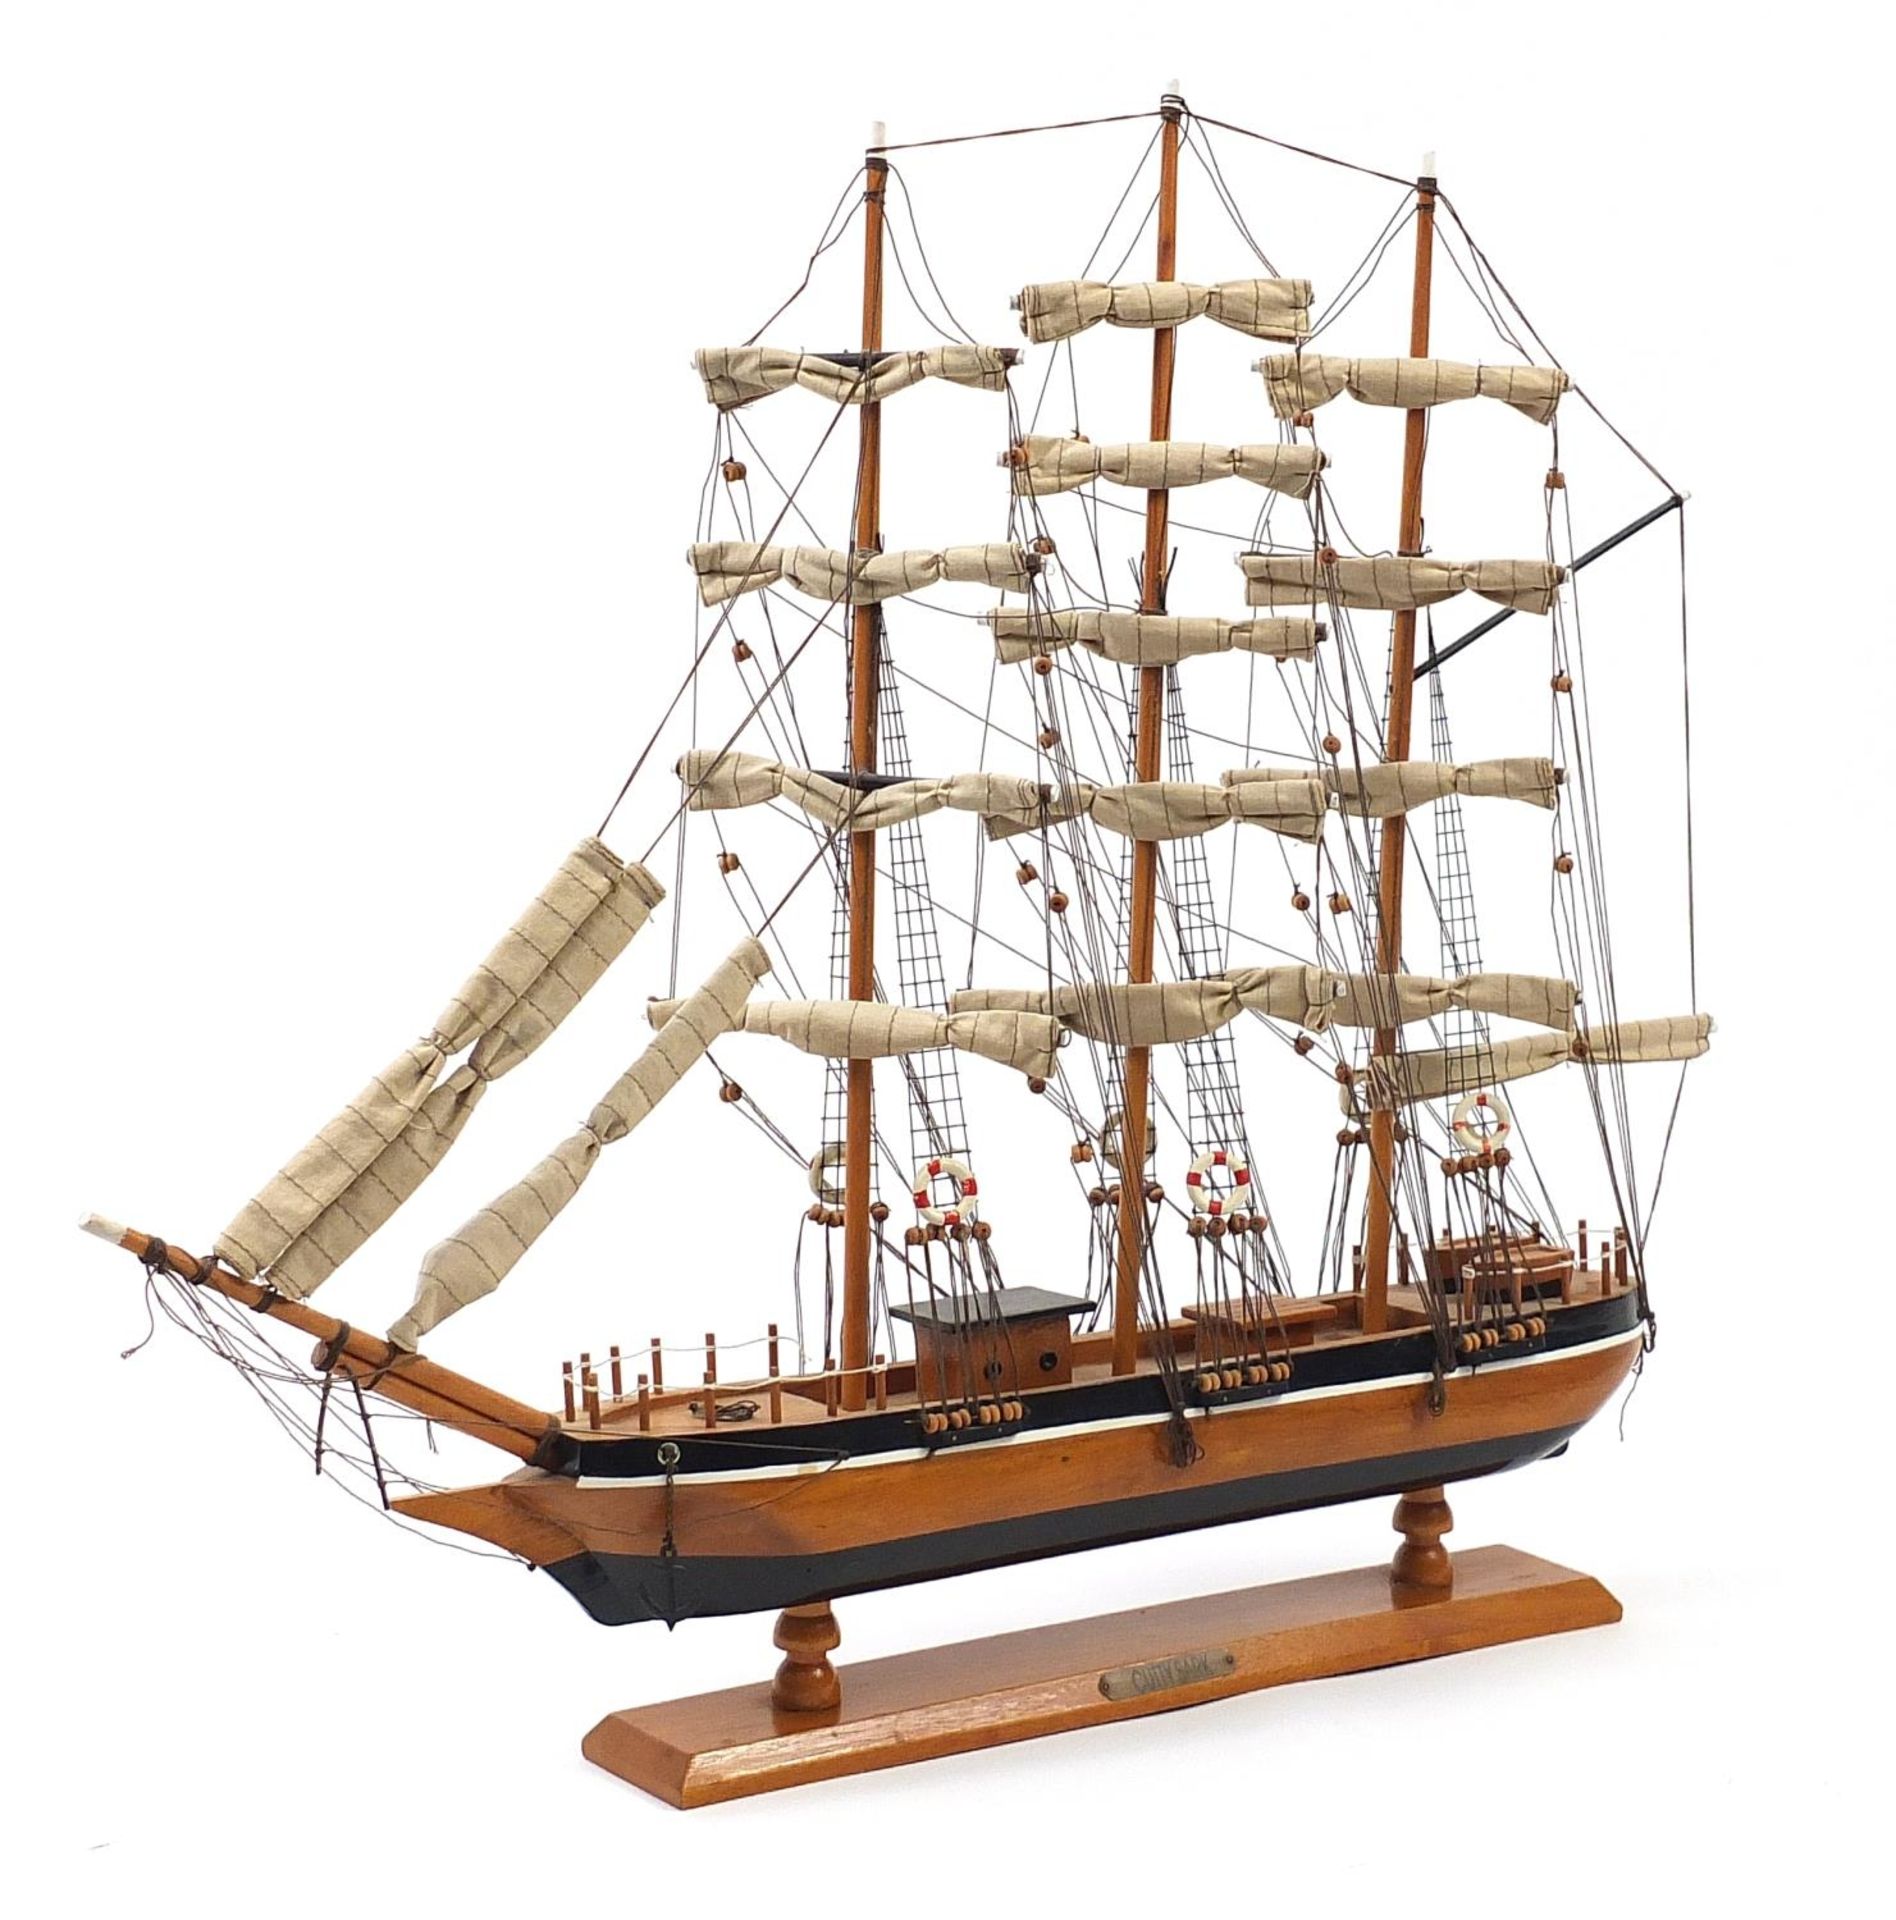 Large wooden model of the Cutty Sark, 80cm in length x 68cm high